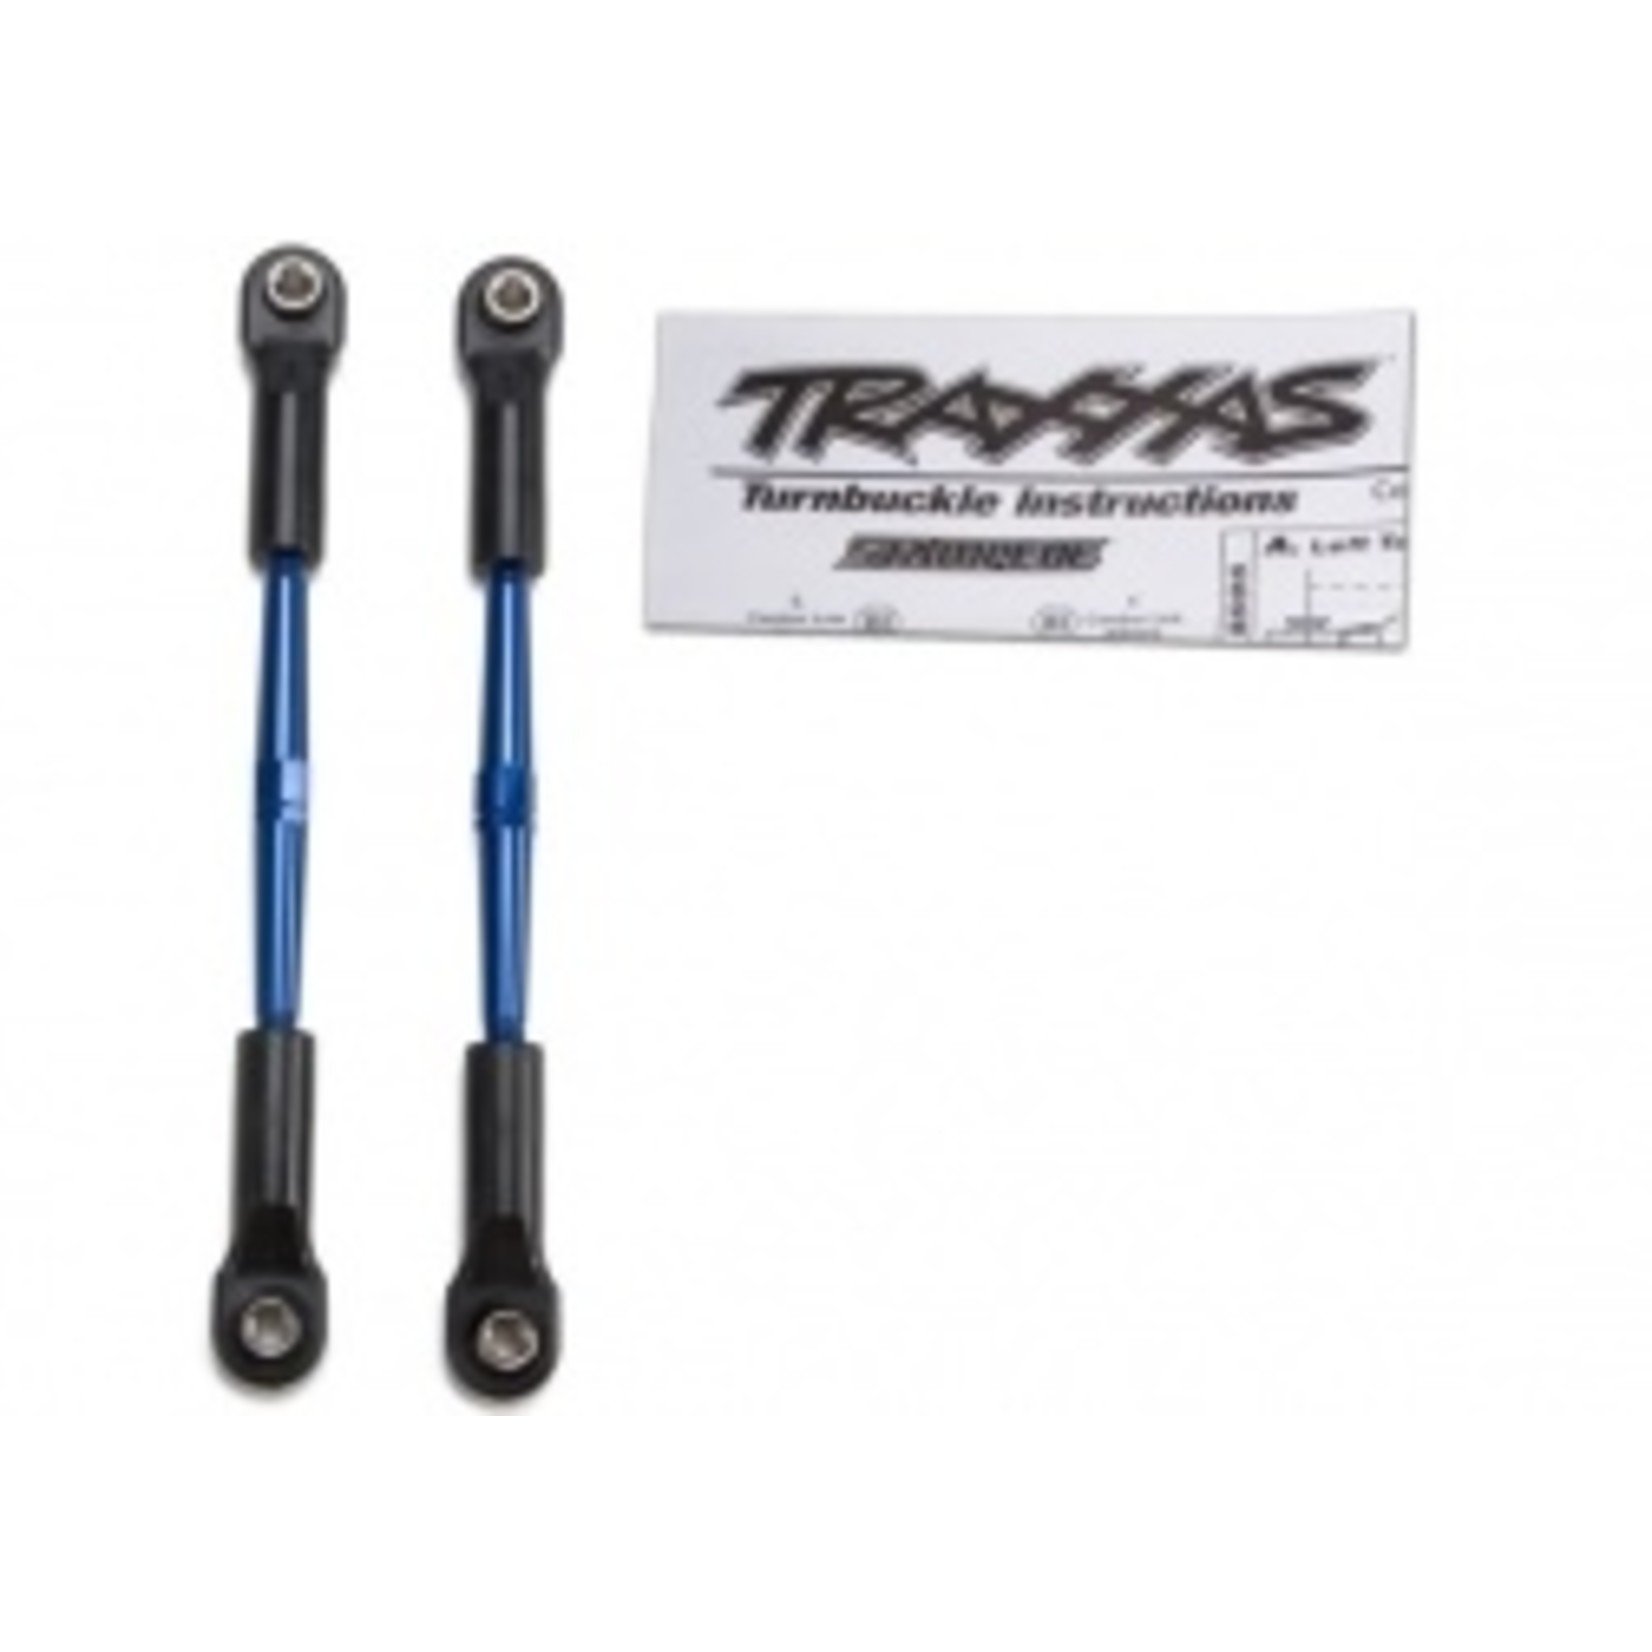 Traxxas 2336A Turnbuckles, aluminum (blue-anodized), toe links, 61mm (2) (assembled w/ rod ends & hollow balls) (fits Stampede®) (requires 5mm aluminum wrench #5477)